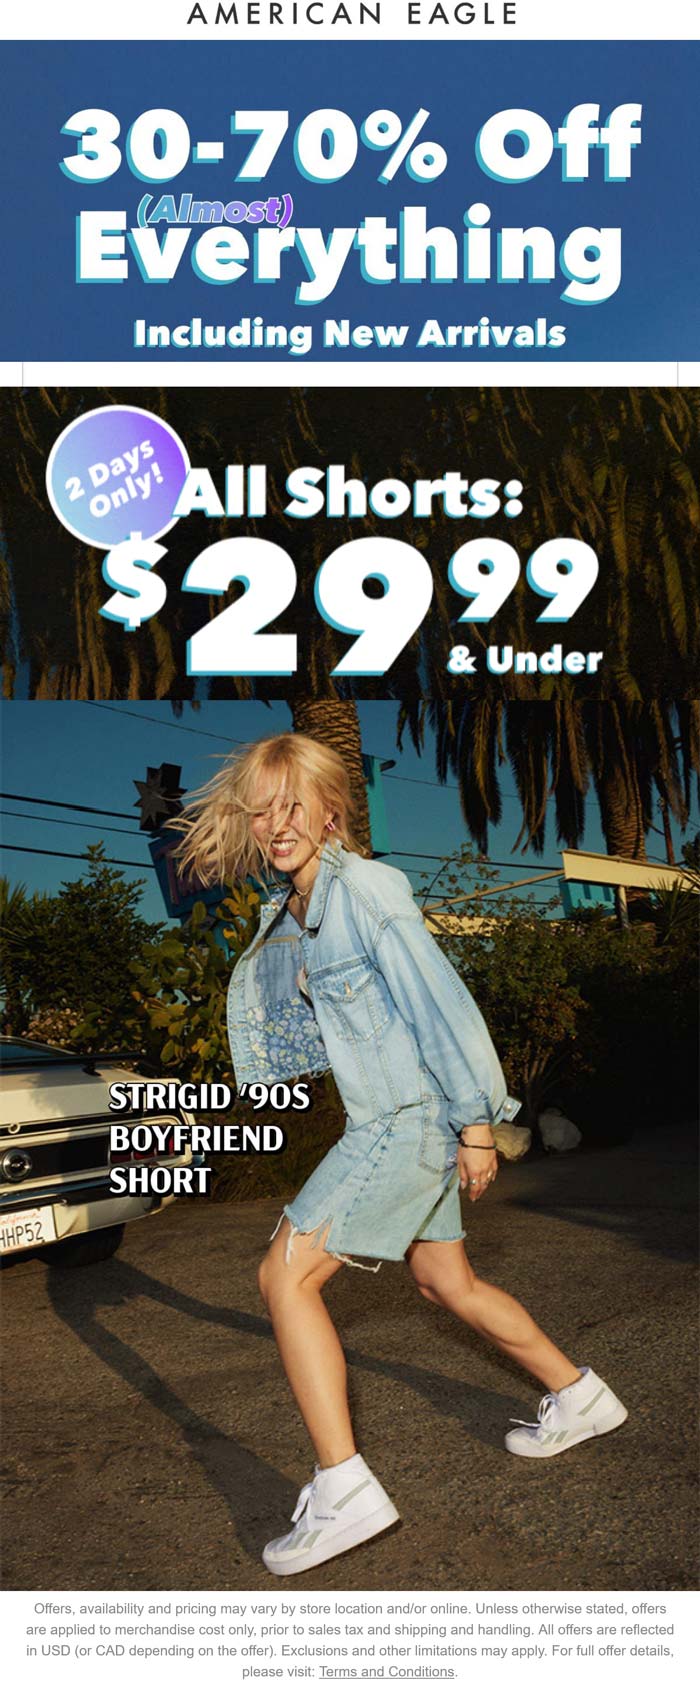 American Eagle stores Coupon  30-70% off at American Eagle #americaneagle 